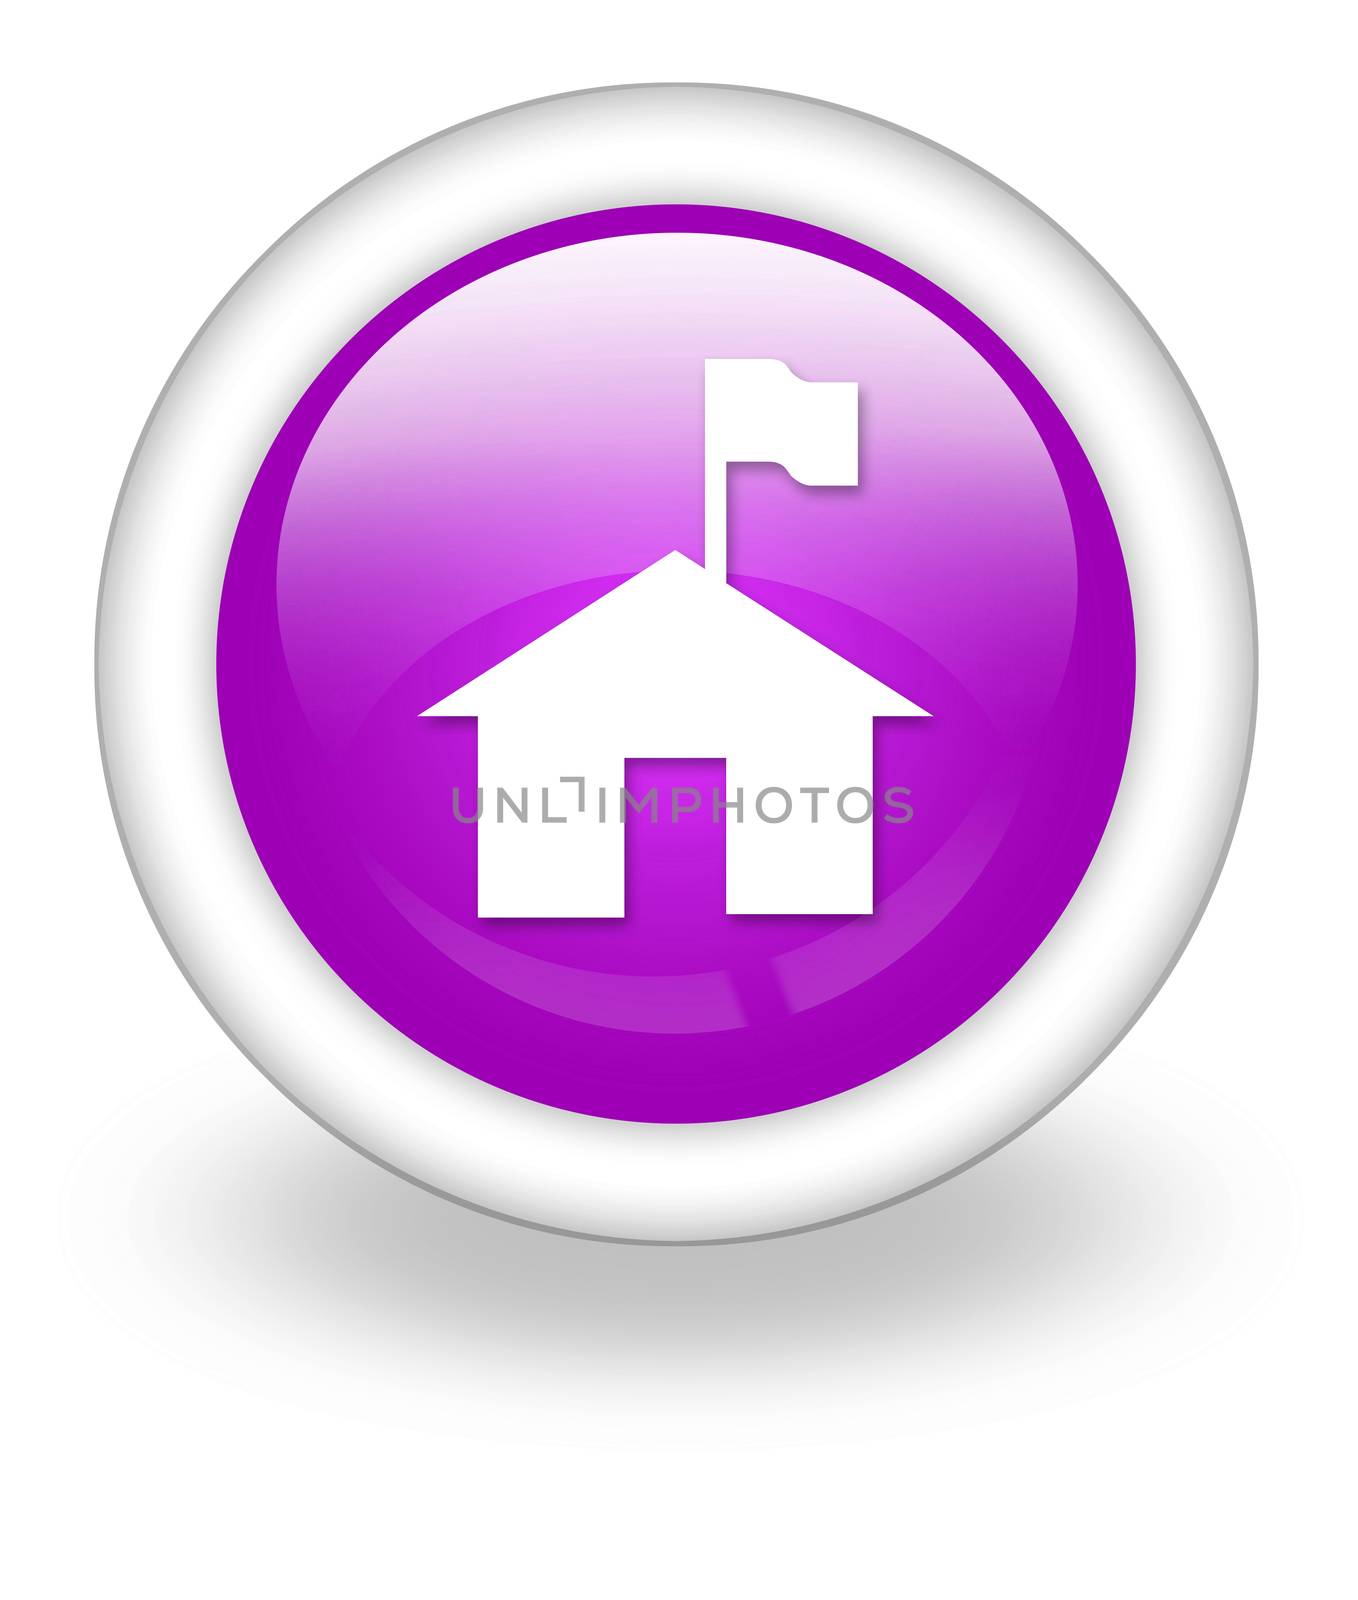 Icon, Button, Pictogram Ranger Station by mindscanner